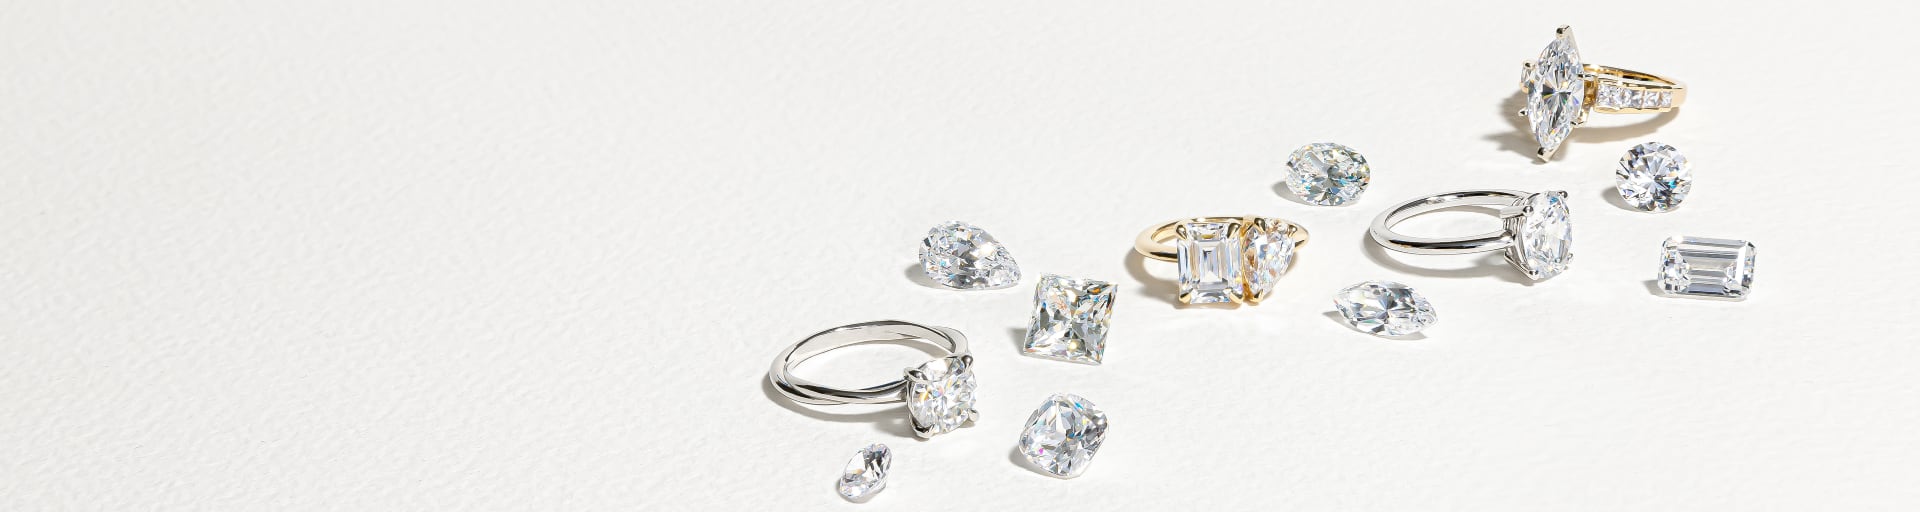 Elongated Cushion Cut Engagement Rings: The Ultimate Guide